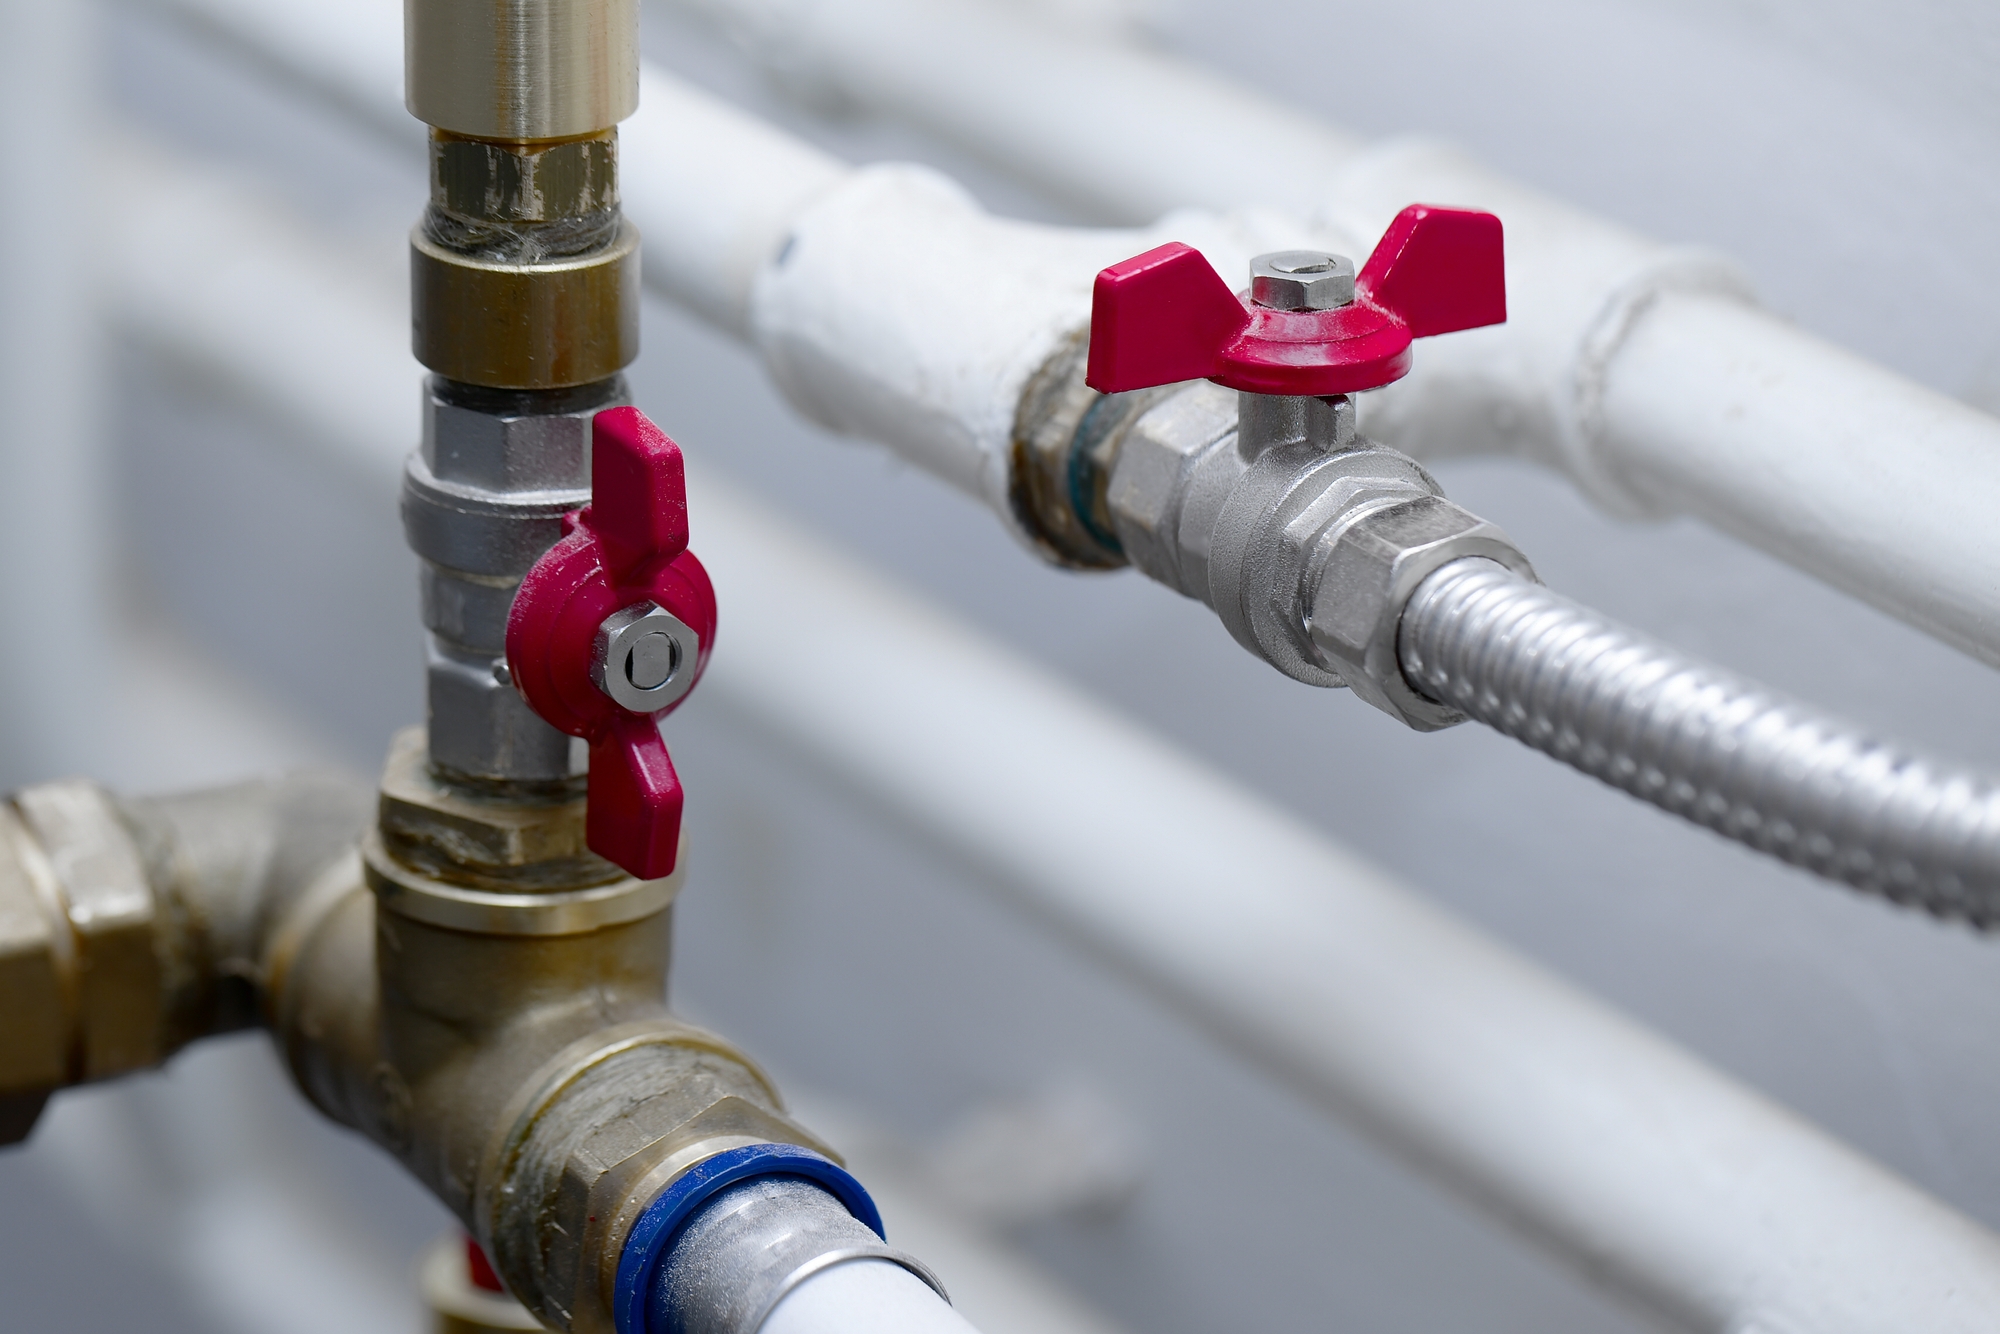 5 Key Plumbing Services That Enhance Your Home Comfort and Value